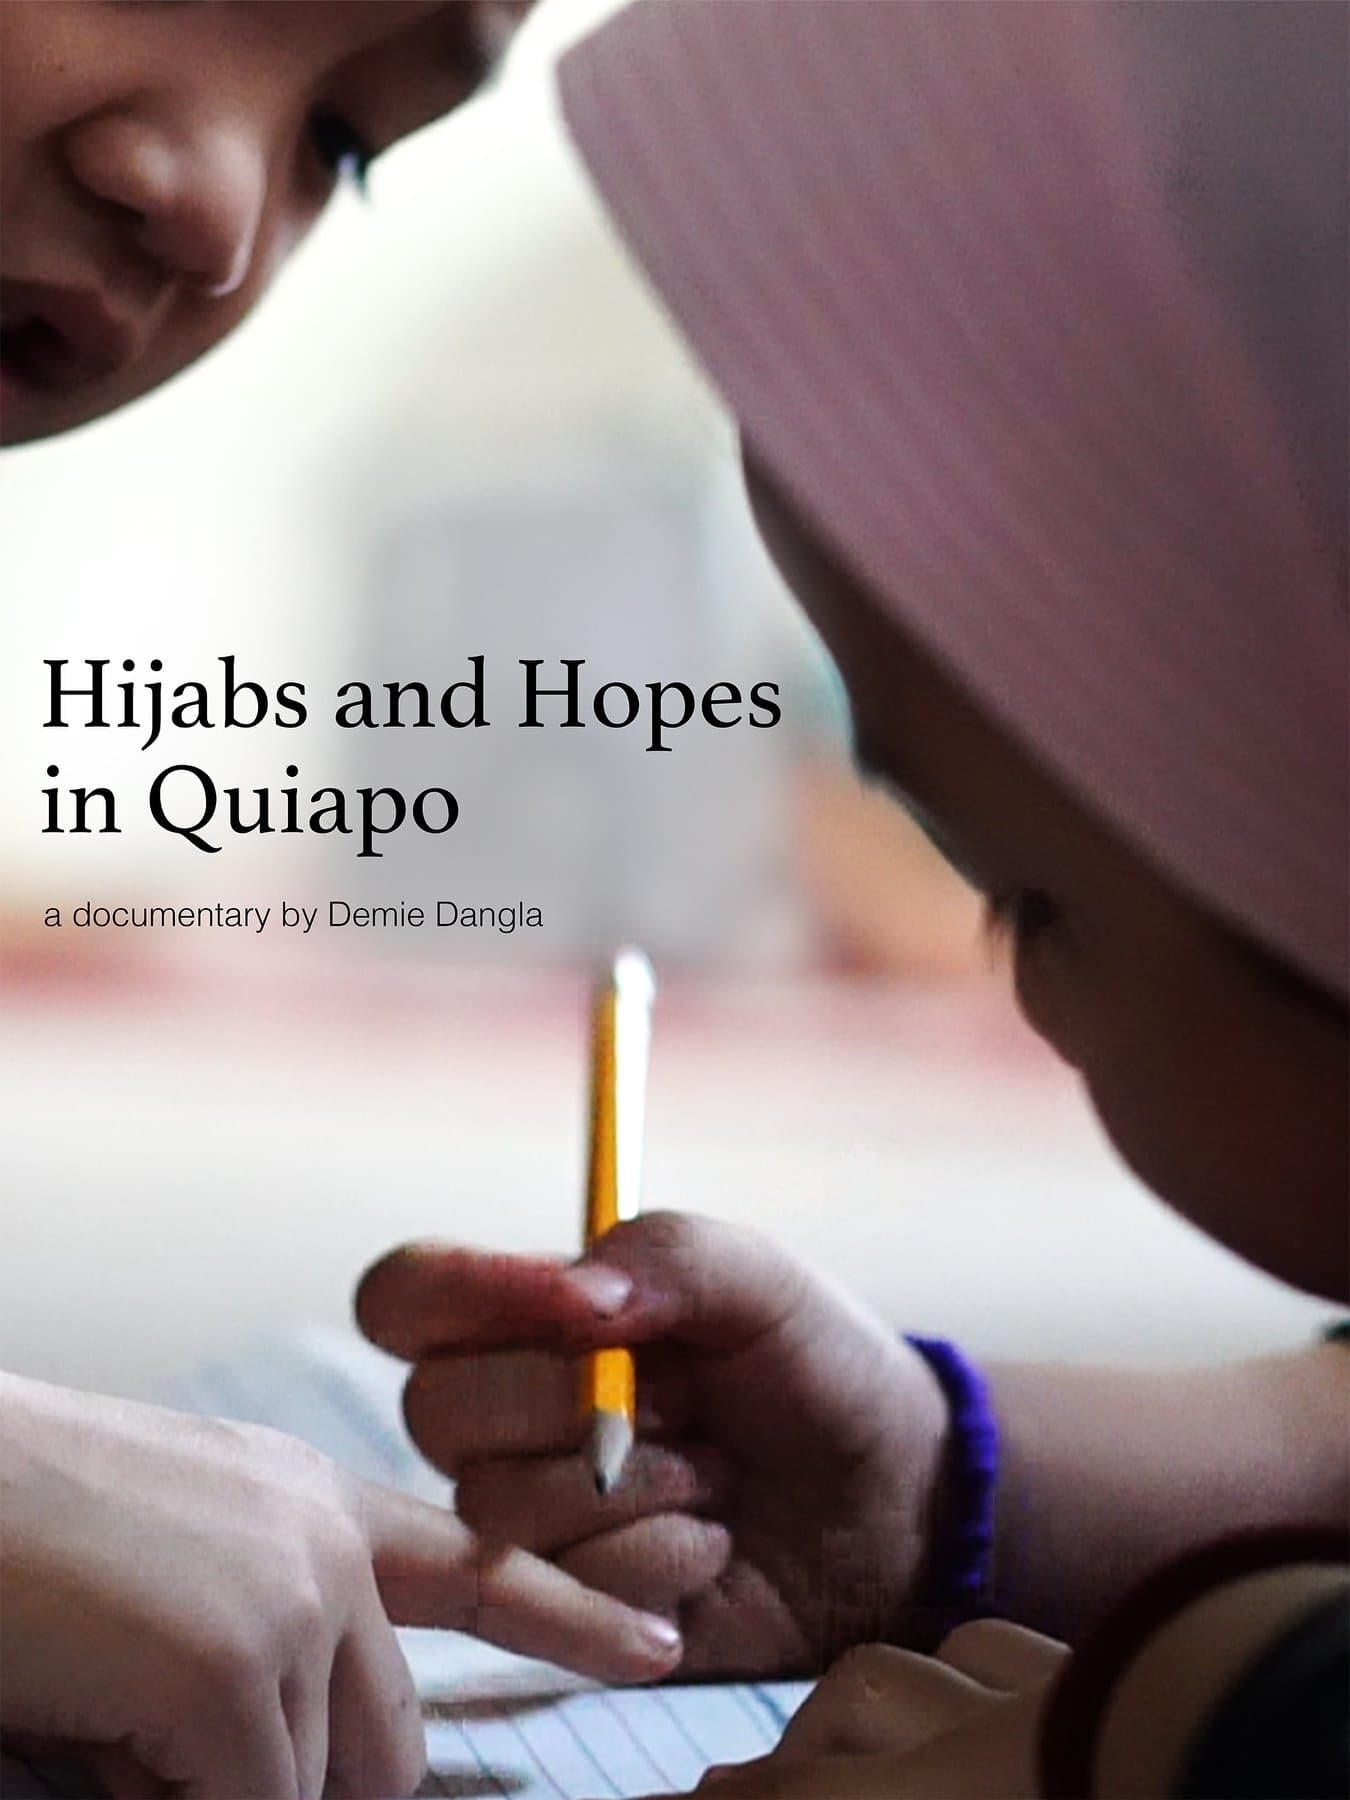 Hijabs and Hopes in Quiapo